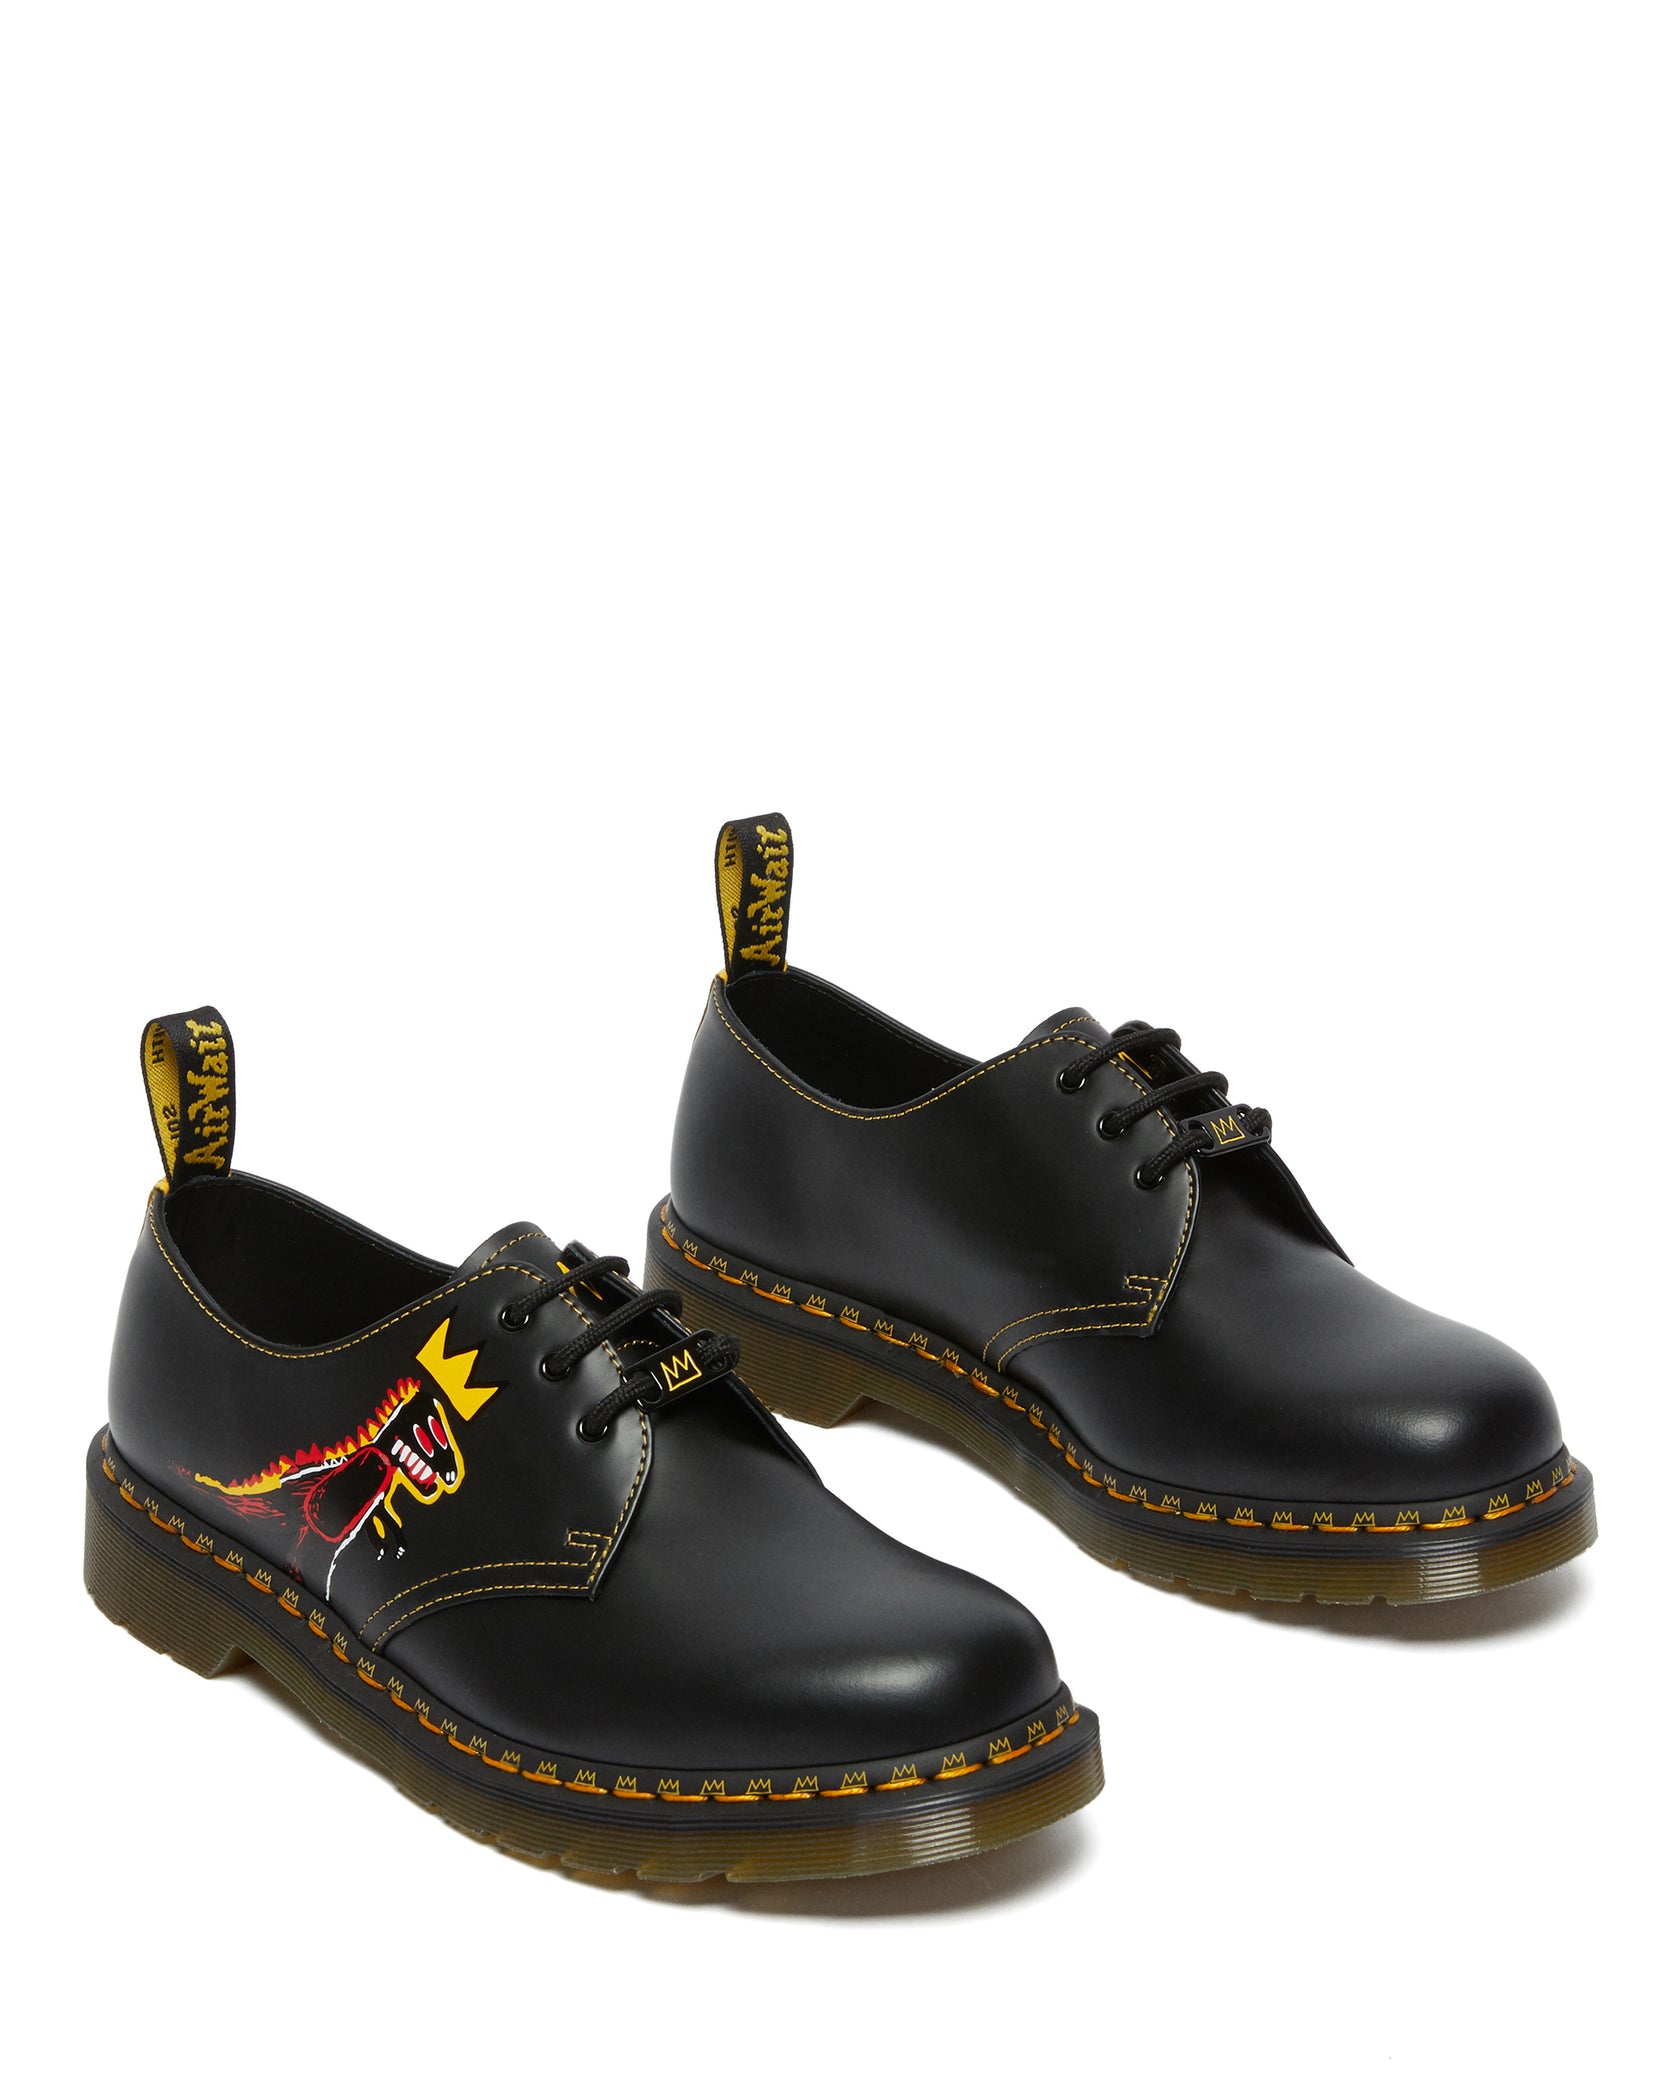 1461 BASQUIAT II BLACK+DMS YELLOW PEZ SMOOTH+SMOOTH LEATHER OXFORD SHO ...